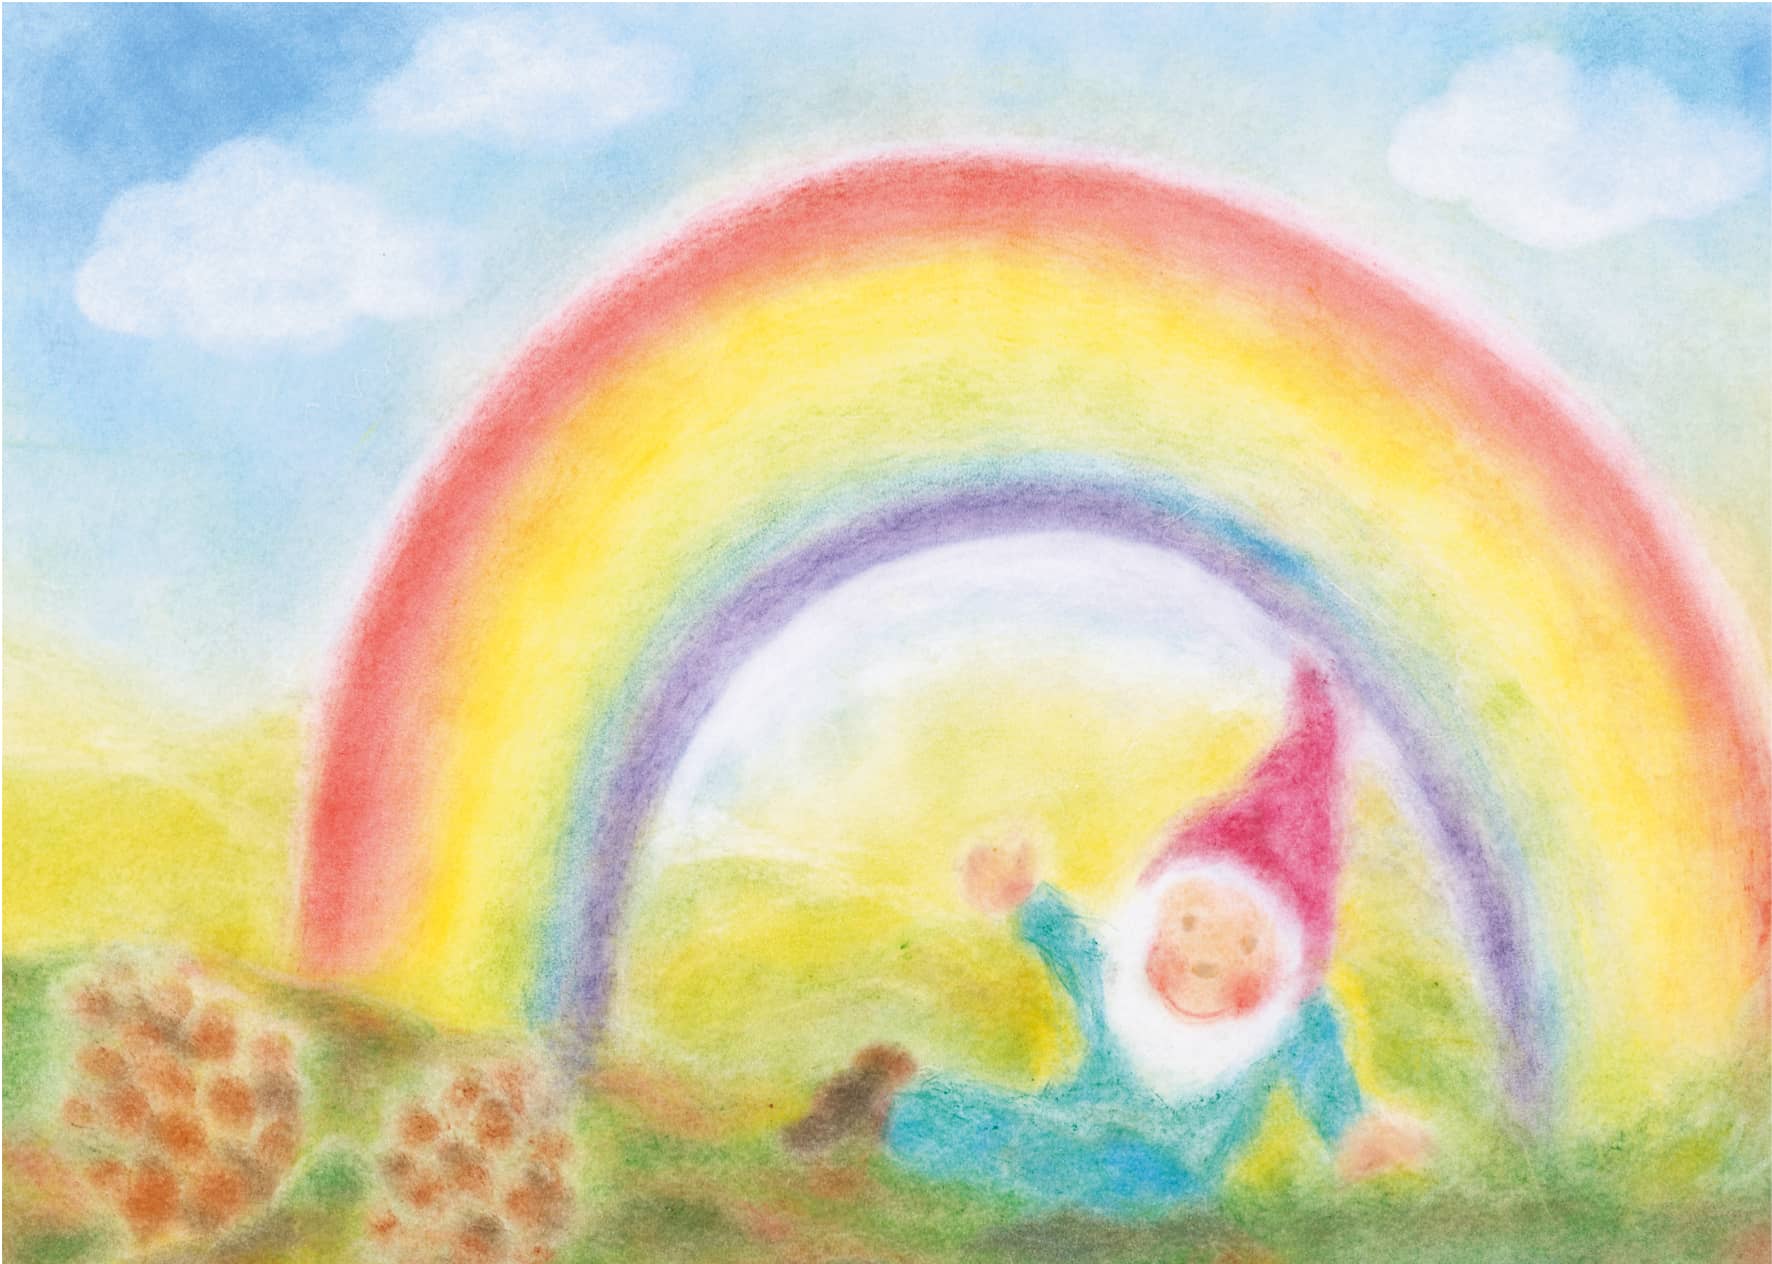 Seccorell postcard "Rainbow Dwarf" shows a cheerful dwarf under a radiant rainbow, artistically depicted with Seccorell colors.